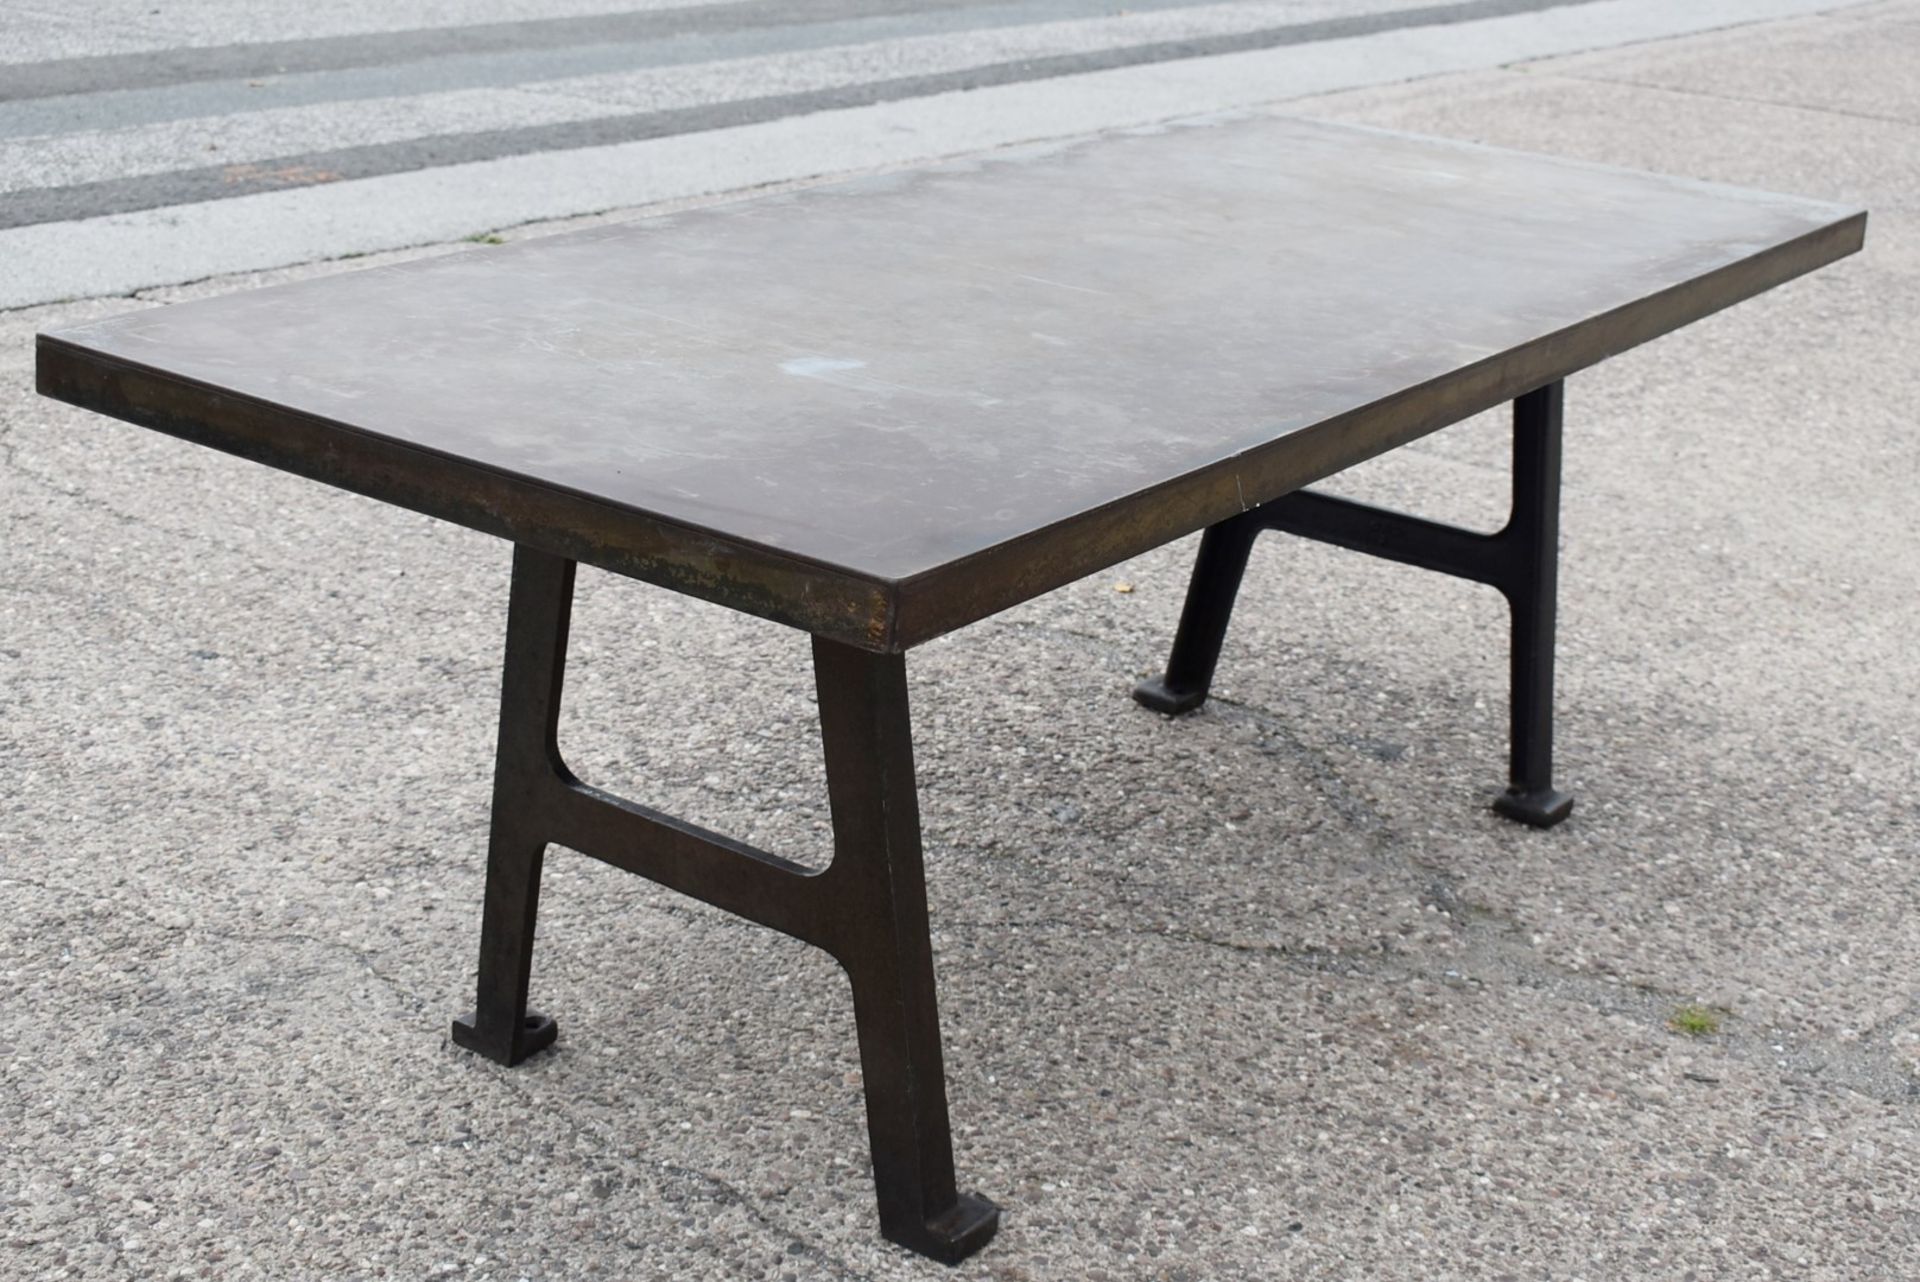 1 x Industrial Style 200cm Banquetting Restaurant Table Featuring a Heavy Steel Top & Steel Legs - Image 12 of 23